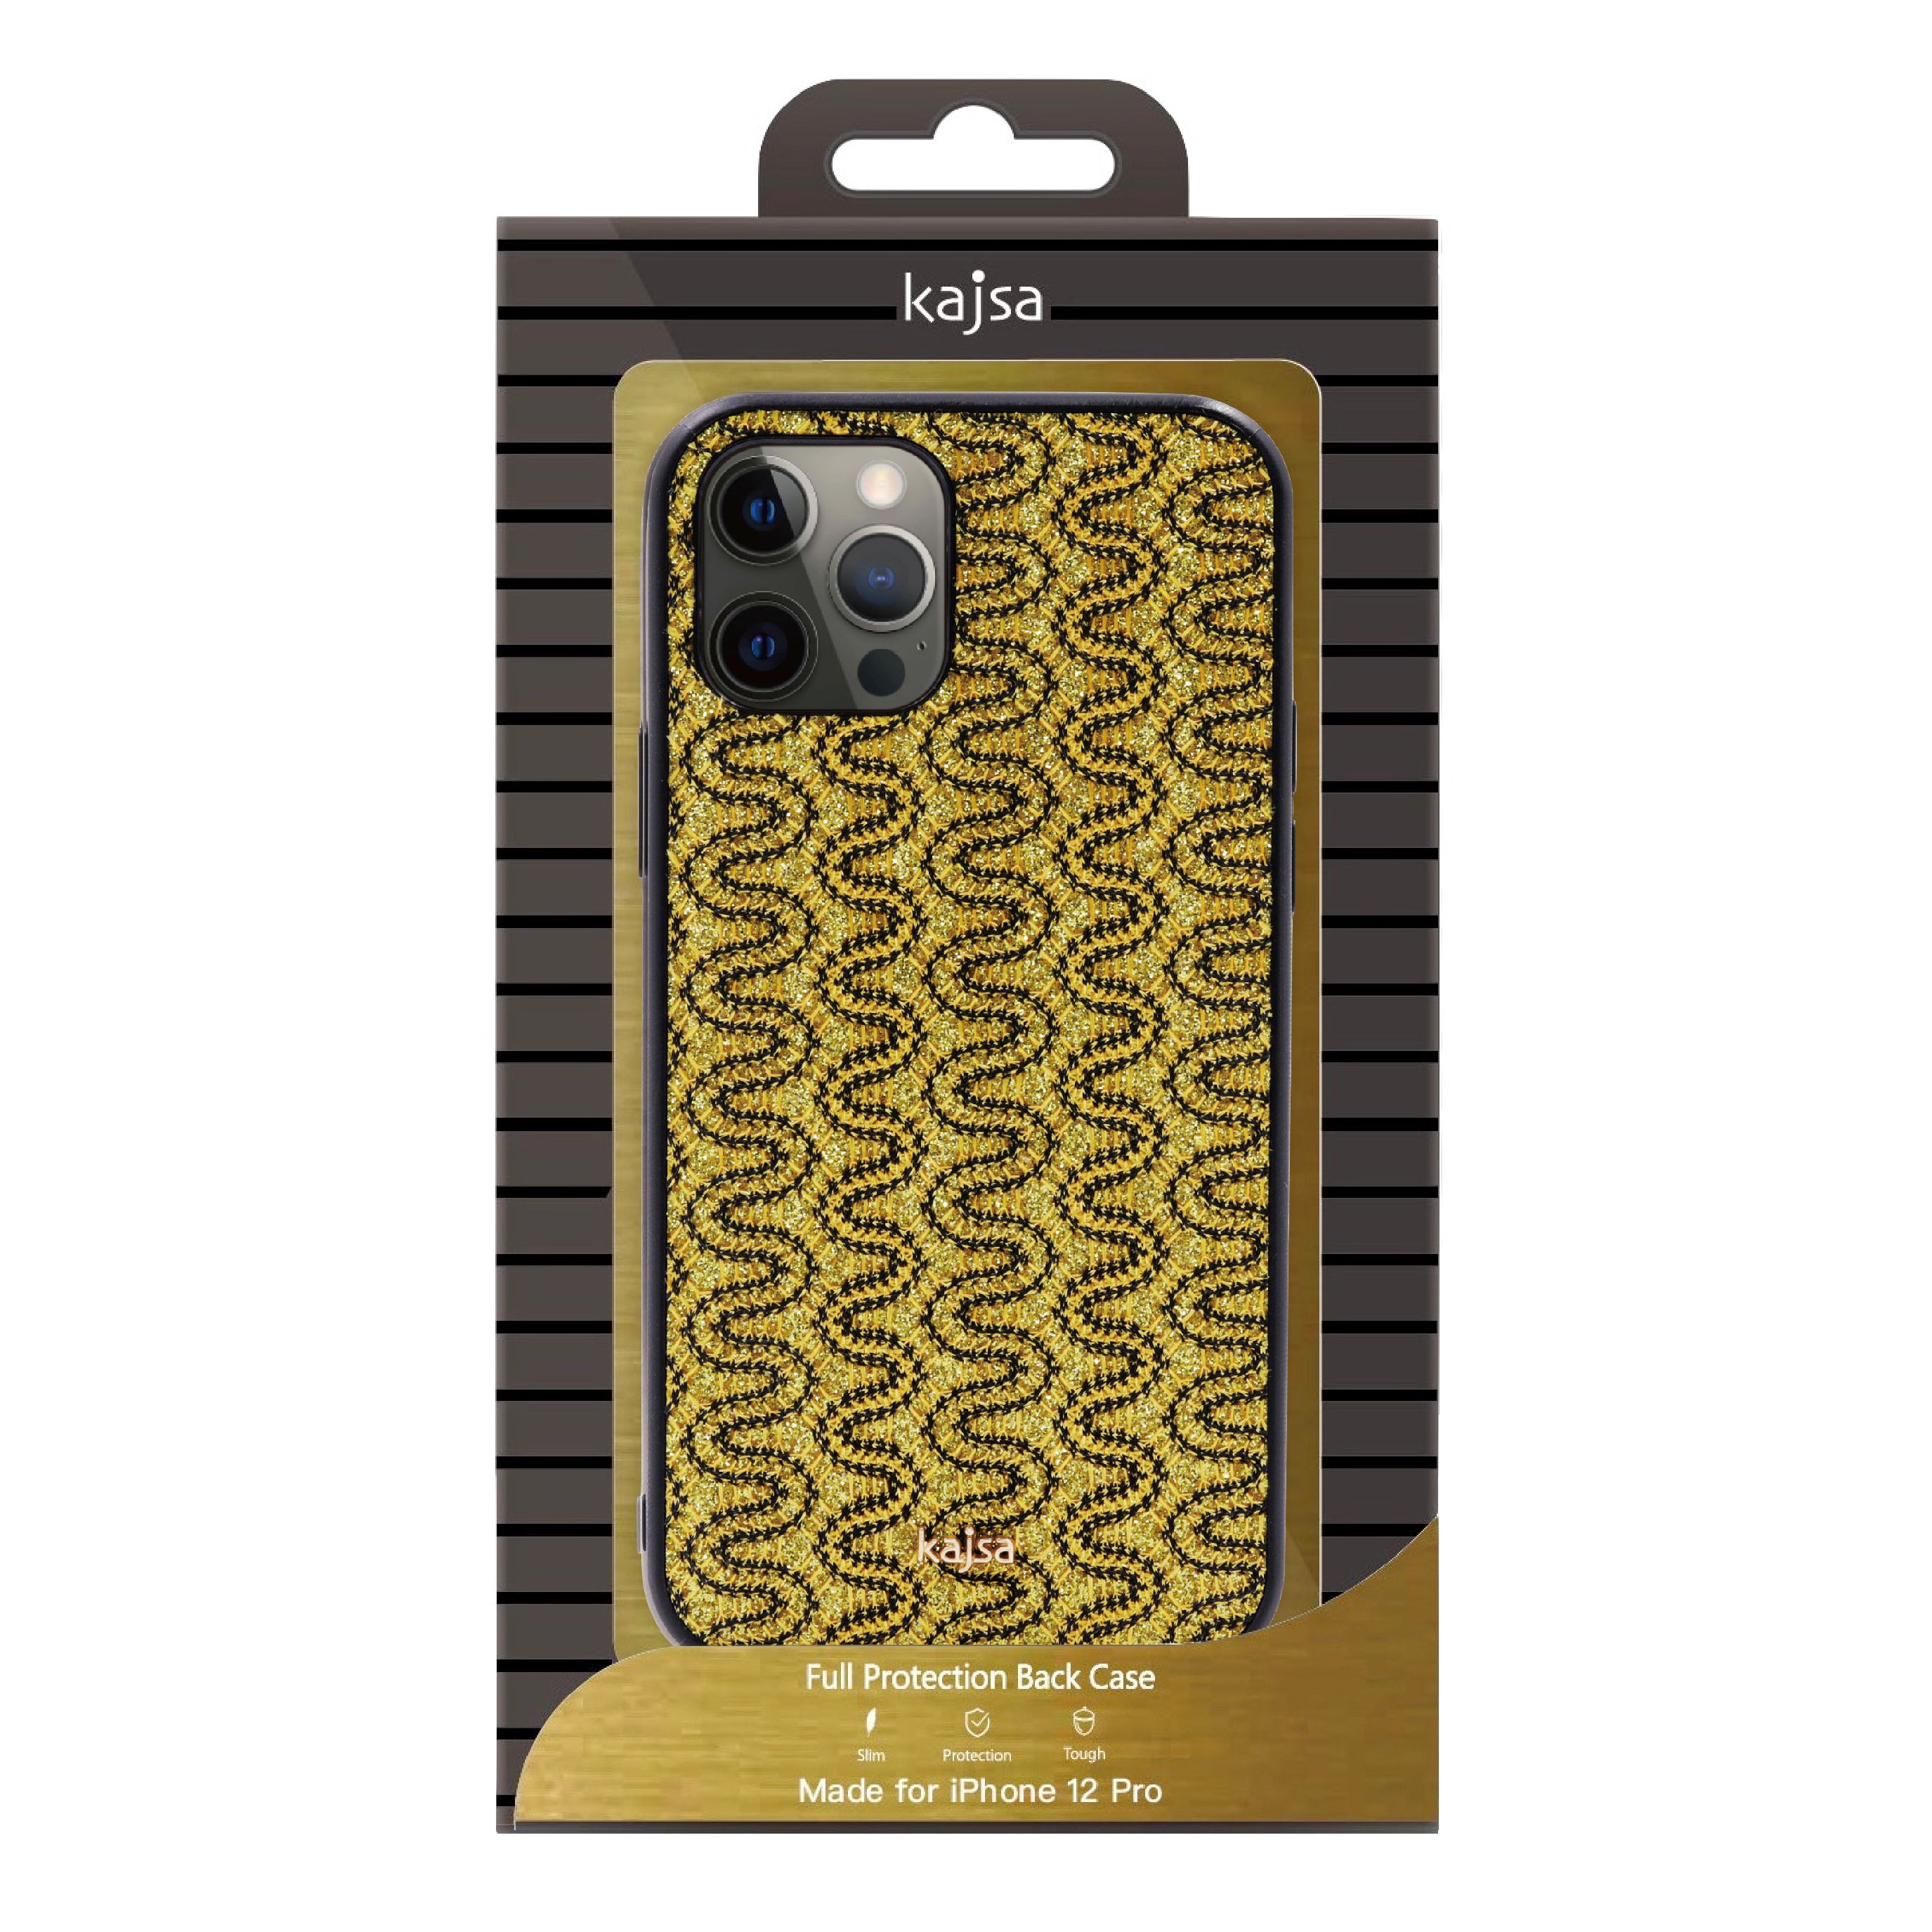 Glamorous Collection - Waterfall Pattern Back Case for iPhone 12-Phone Case- phone case - phone cases- phone cover- iphone cover- iphone case- iphone cases- leather case- leather cases- DIYCASE - custom case - leather cover - hand strap case - croco pattern case - snake pattern case - carbon fiber phone case - phone case brand - unique phone case - high quality - phone case brand - protective case - buy phone case hong kong - online buy phone case - iphone‎手機殼 - 客製化手機殼 - samsung ‎手機殼 - 香港手機殼 - 買電話殼